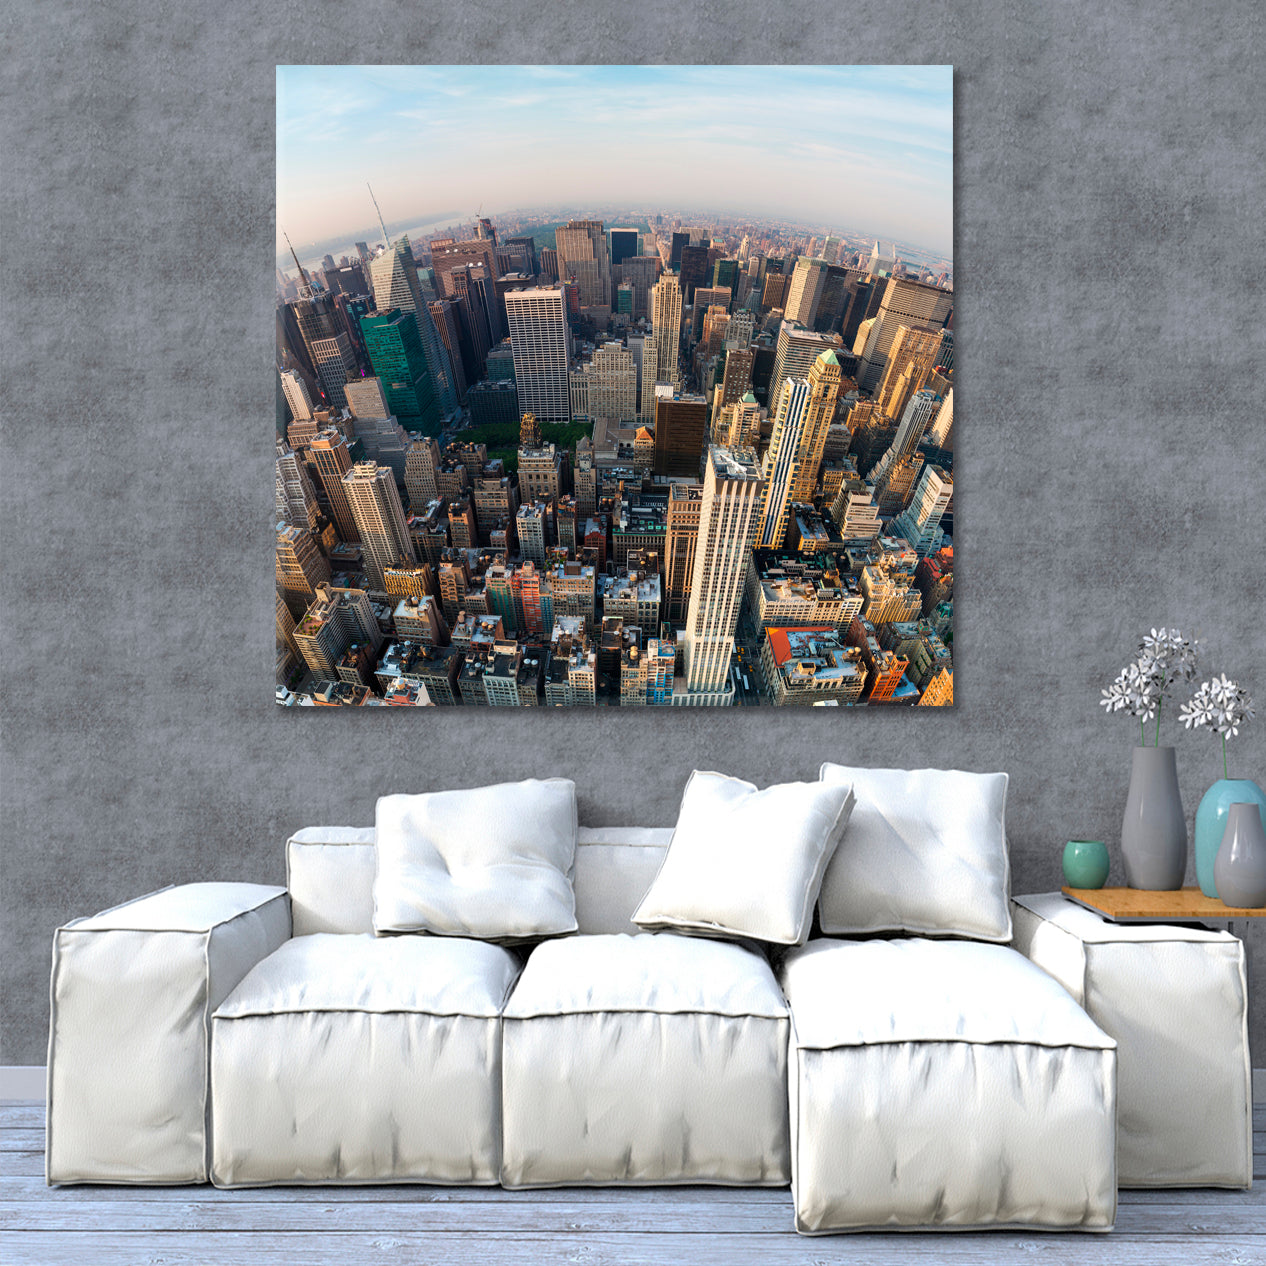 View Down to New York City Cities Wall Art Artesty 1 Panel 12"x12" 